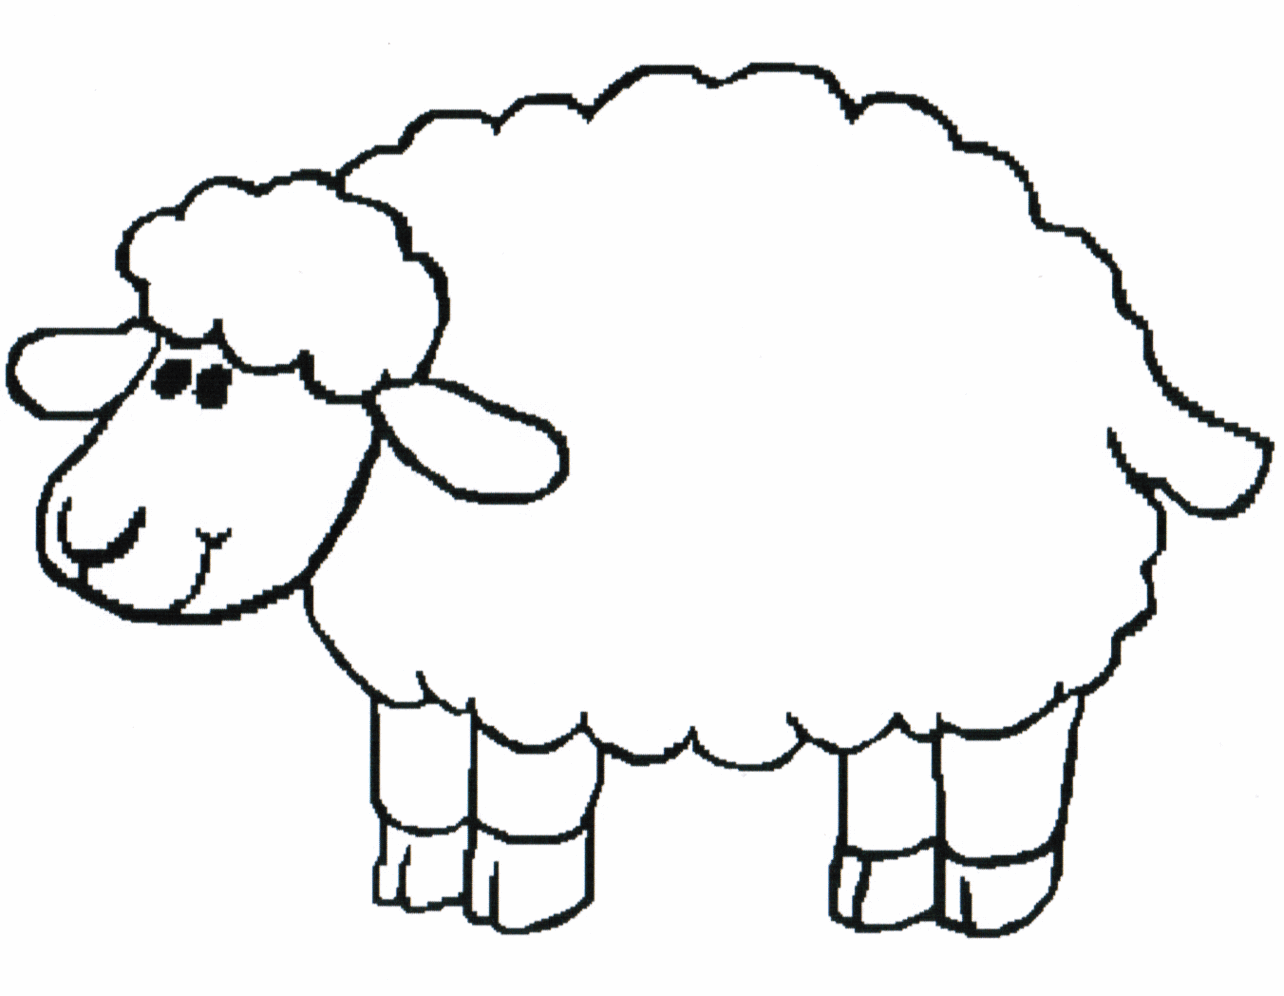 How to draw a sheep clipart free to use clip art resource